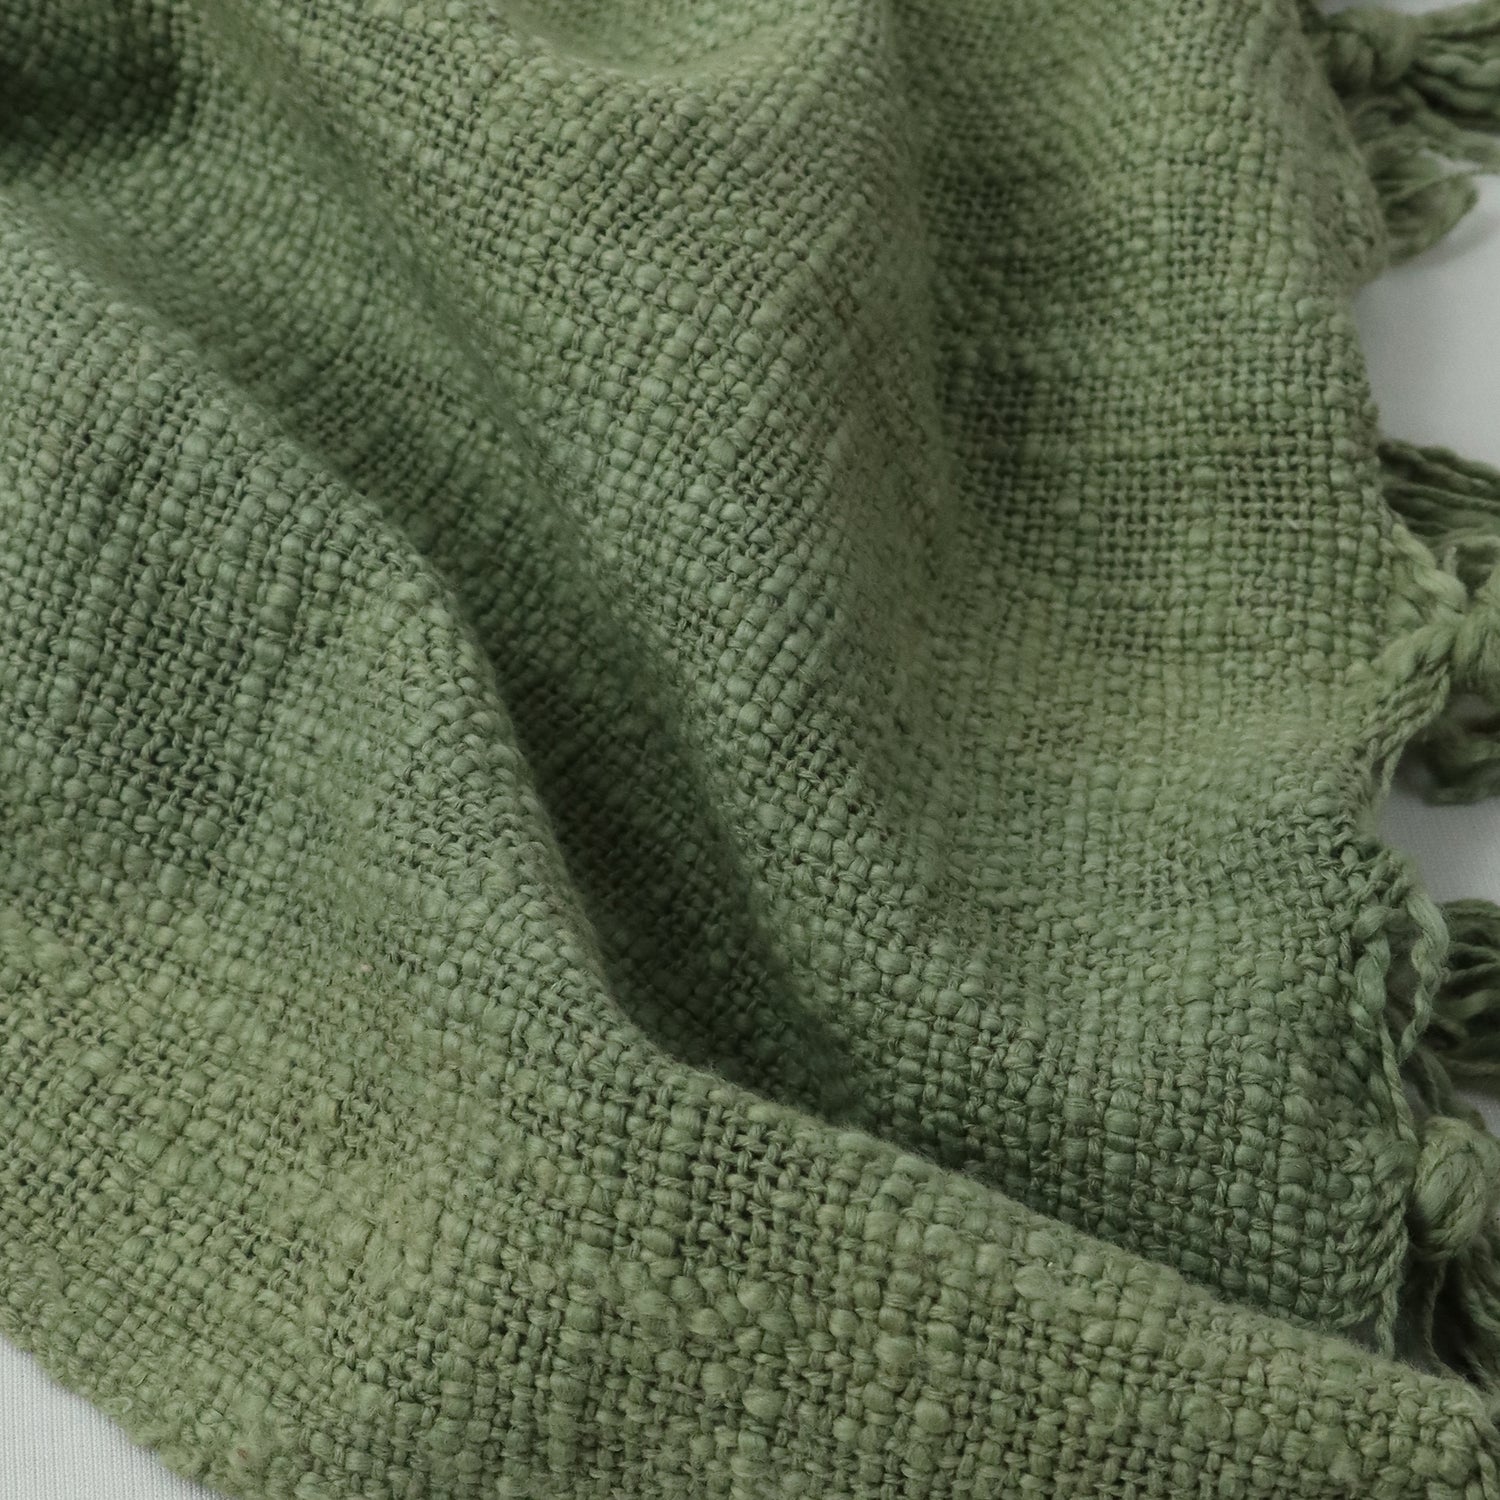 Green Solid Soft Cotton Home Decorative Throw Blanket